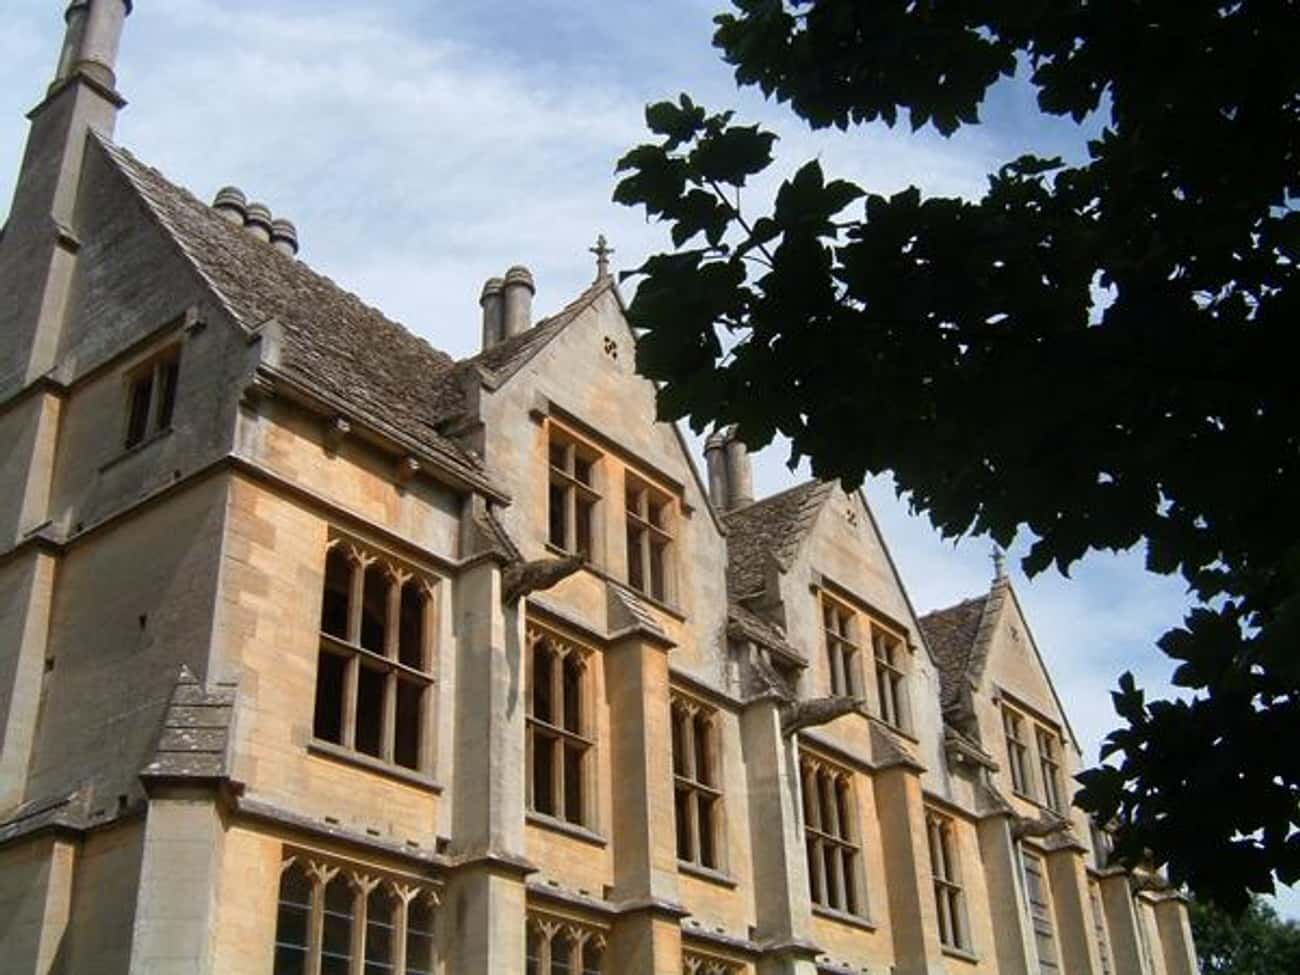 Woodchester Mansion, The Home That Would Have Been Too Expensive to Run